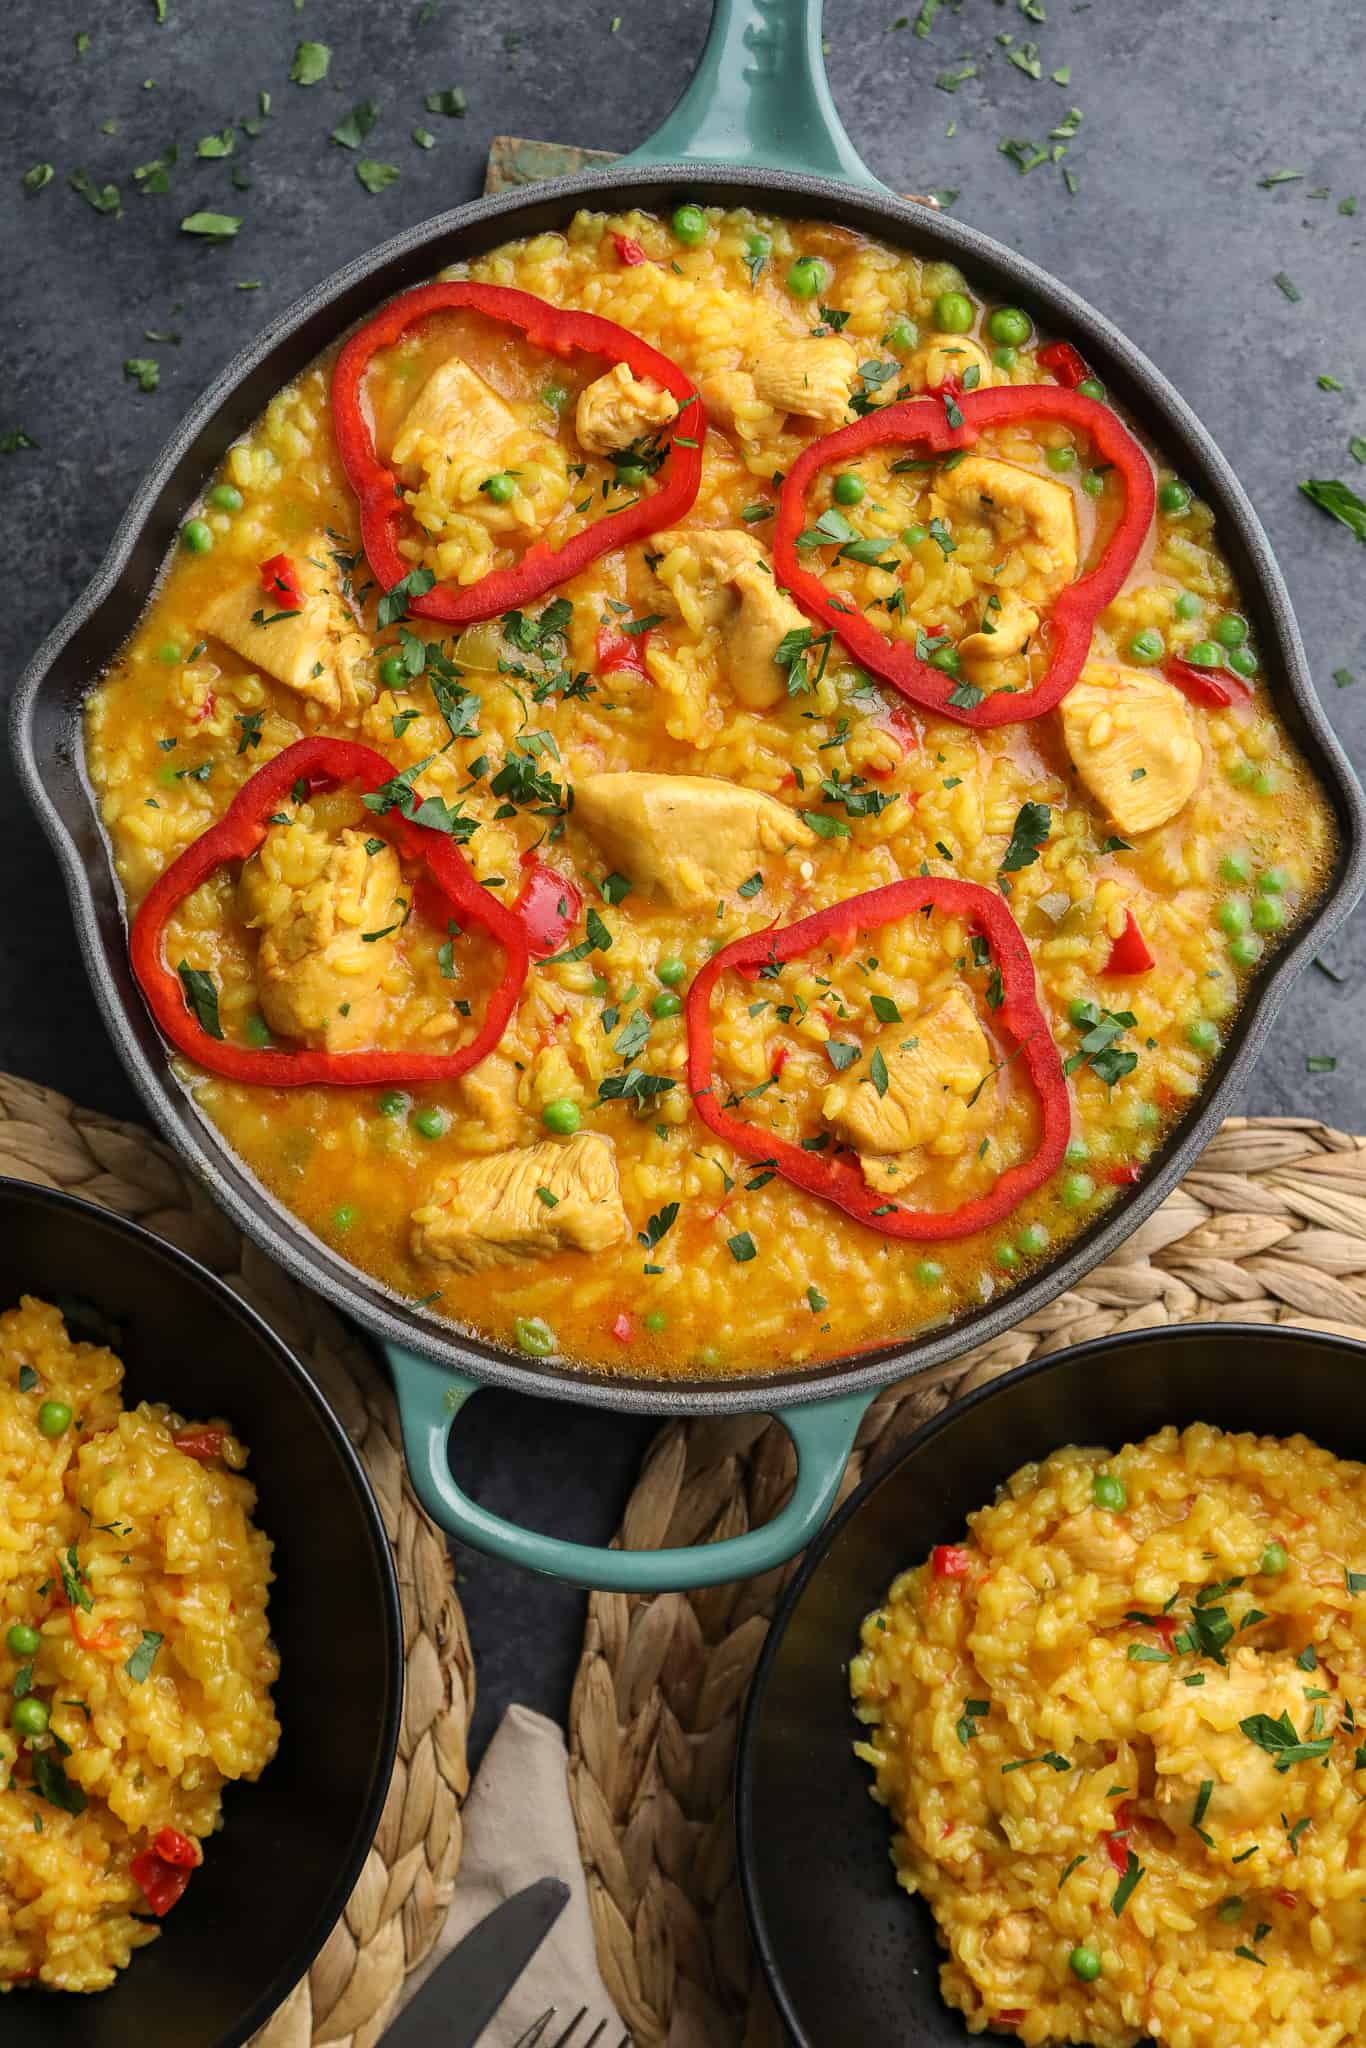 Cuban arroz con pollo in a cast iron skillet with sliced red bell peppers.